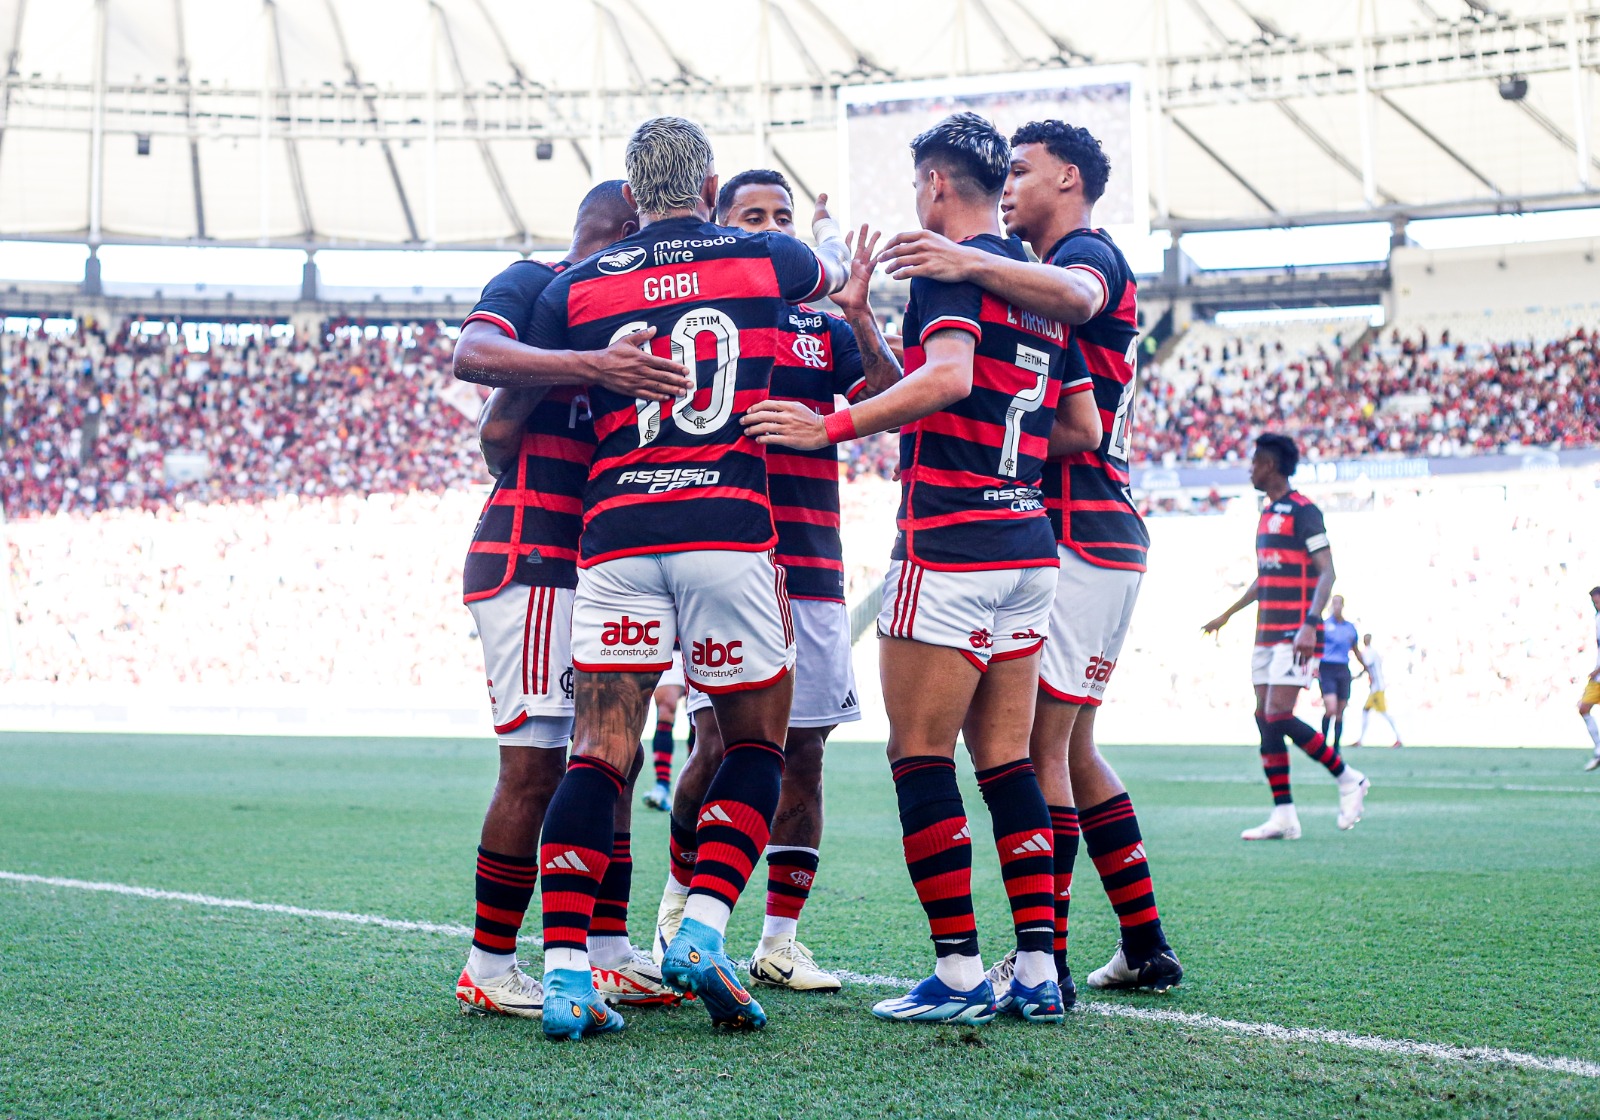 Flamengo defeats Volta Redonda at Maracanã and takes second place in the Guanabara Cup